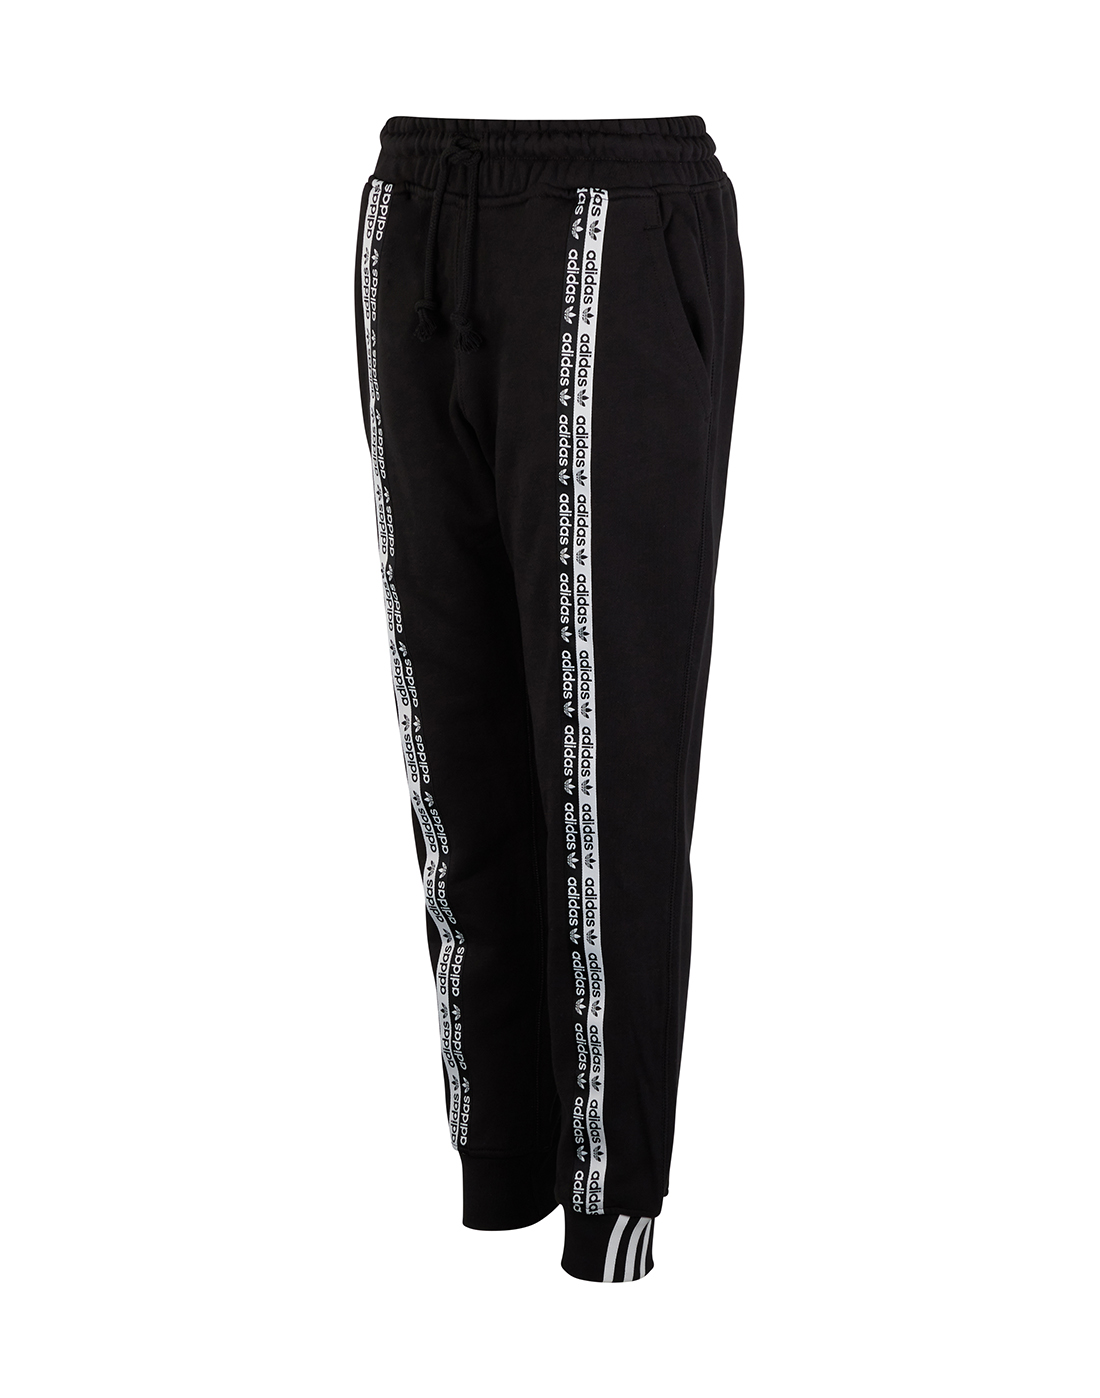 adidas Originals Womens Reveal Your Voice Pant Black | Life Style Sports